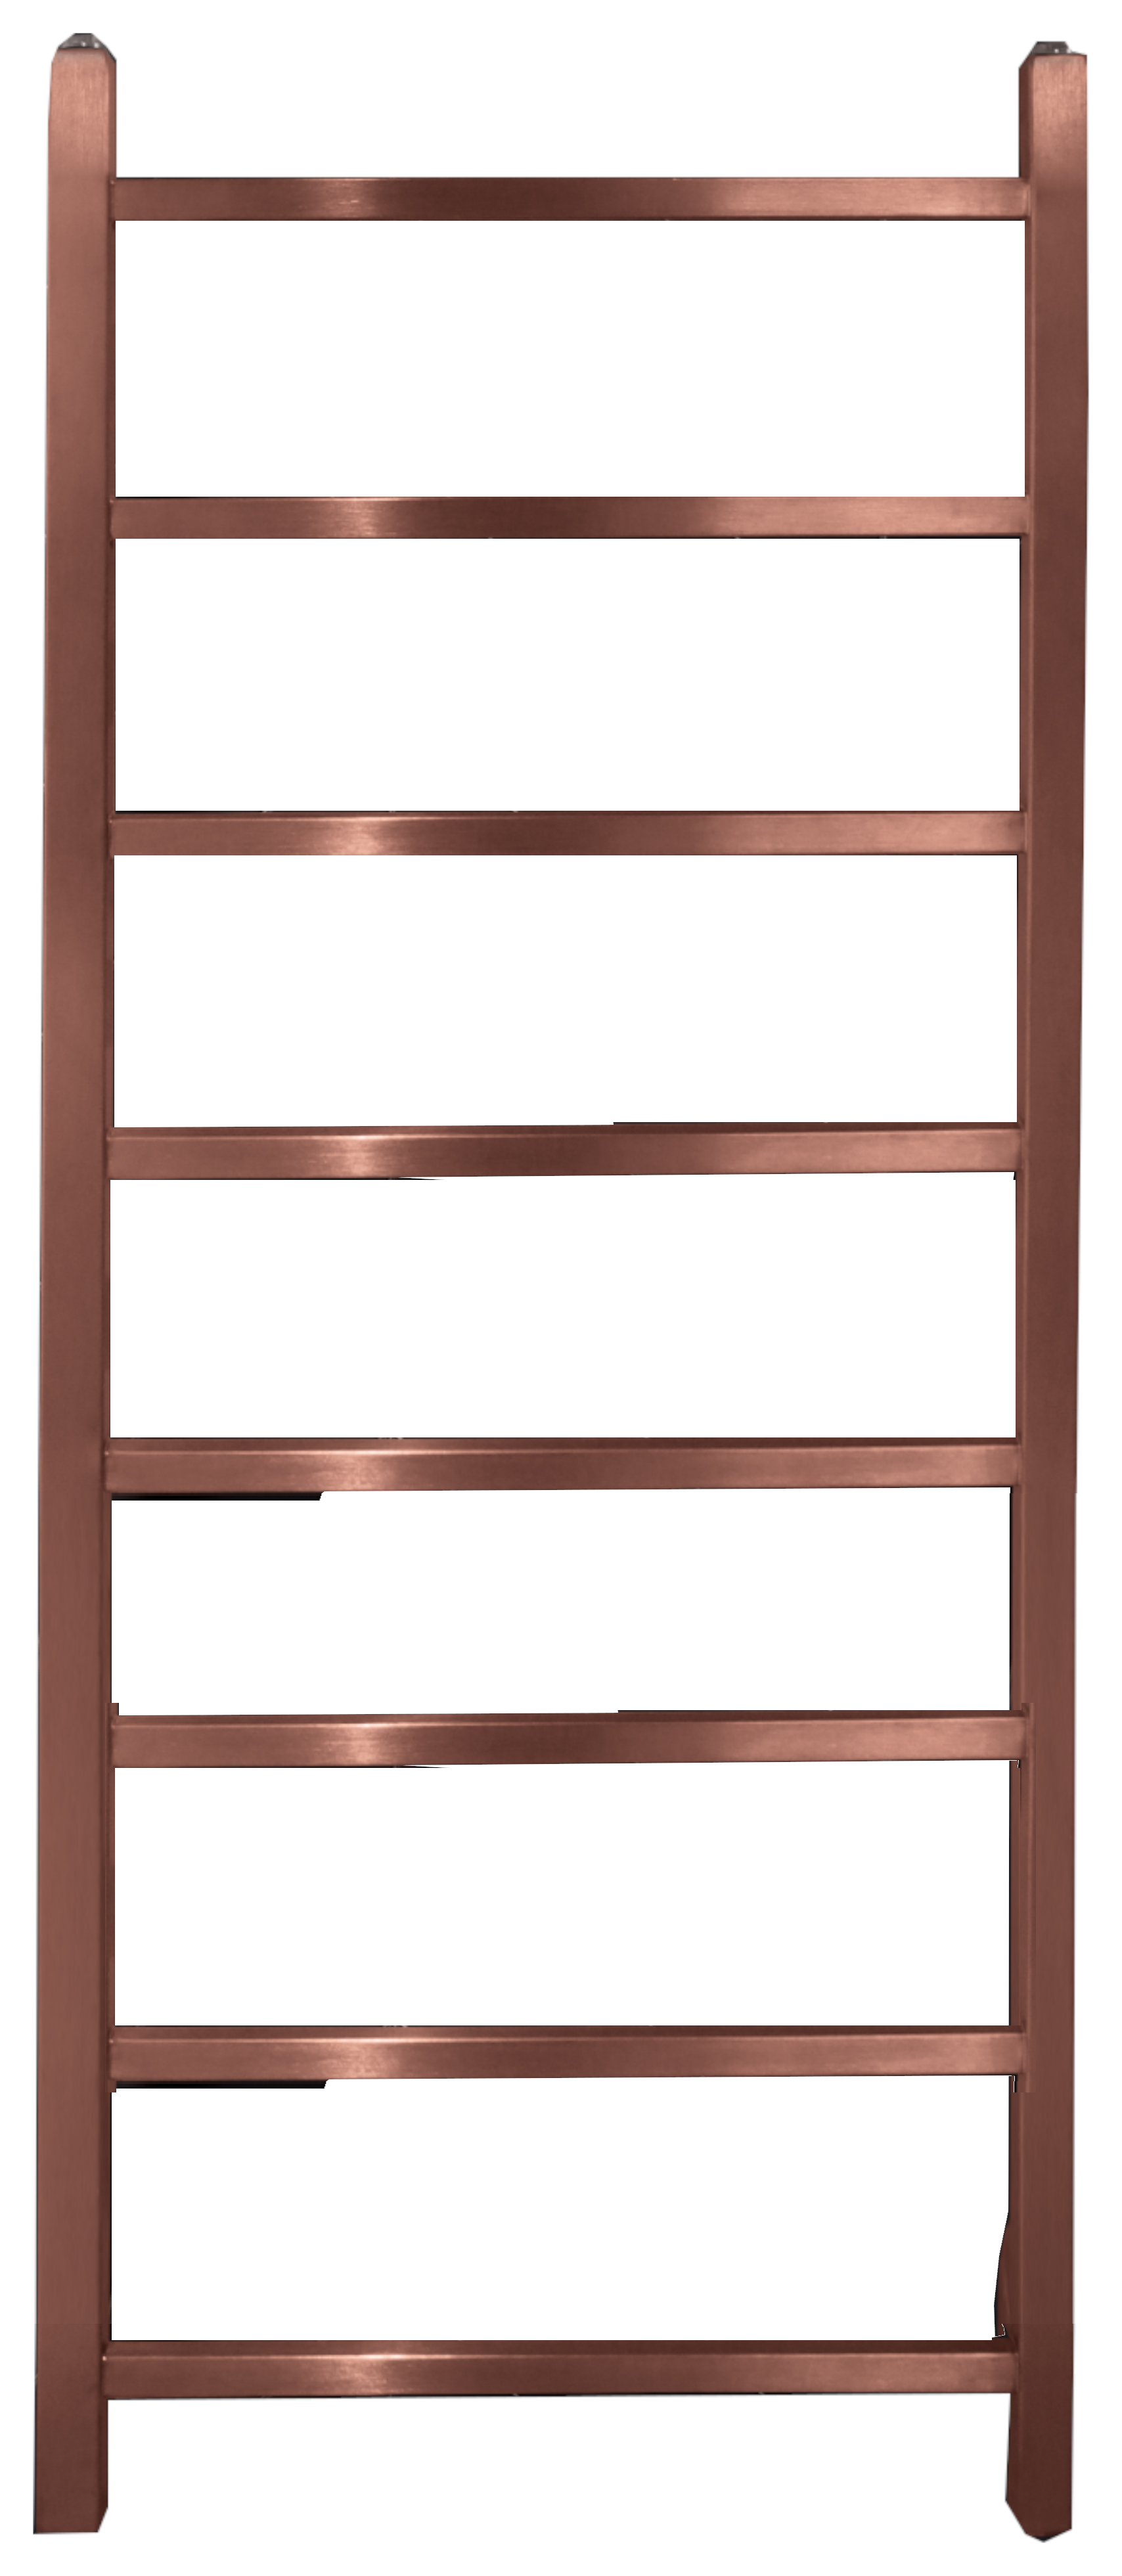 Image of Towelrads Diva Rose Gold Dry Electric Non Thermostatic Towel Radiator - 1200 x 500mm